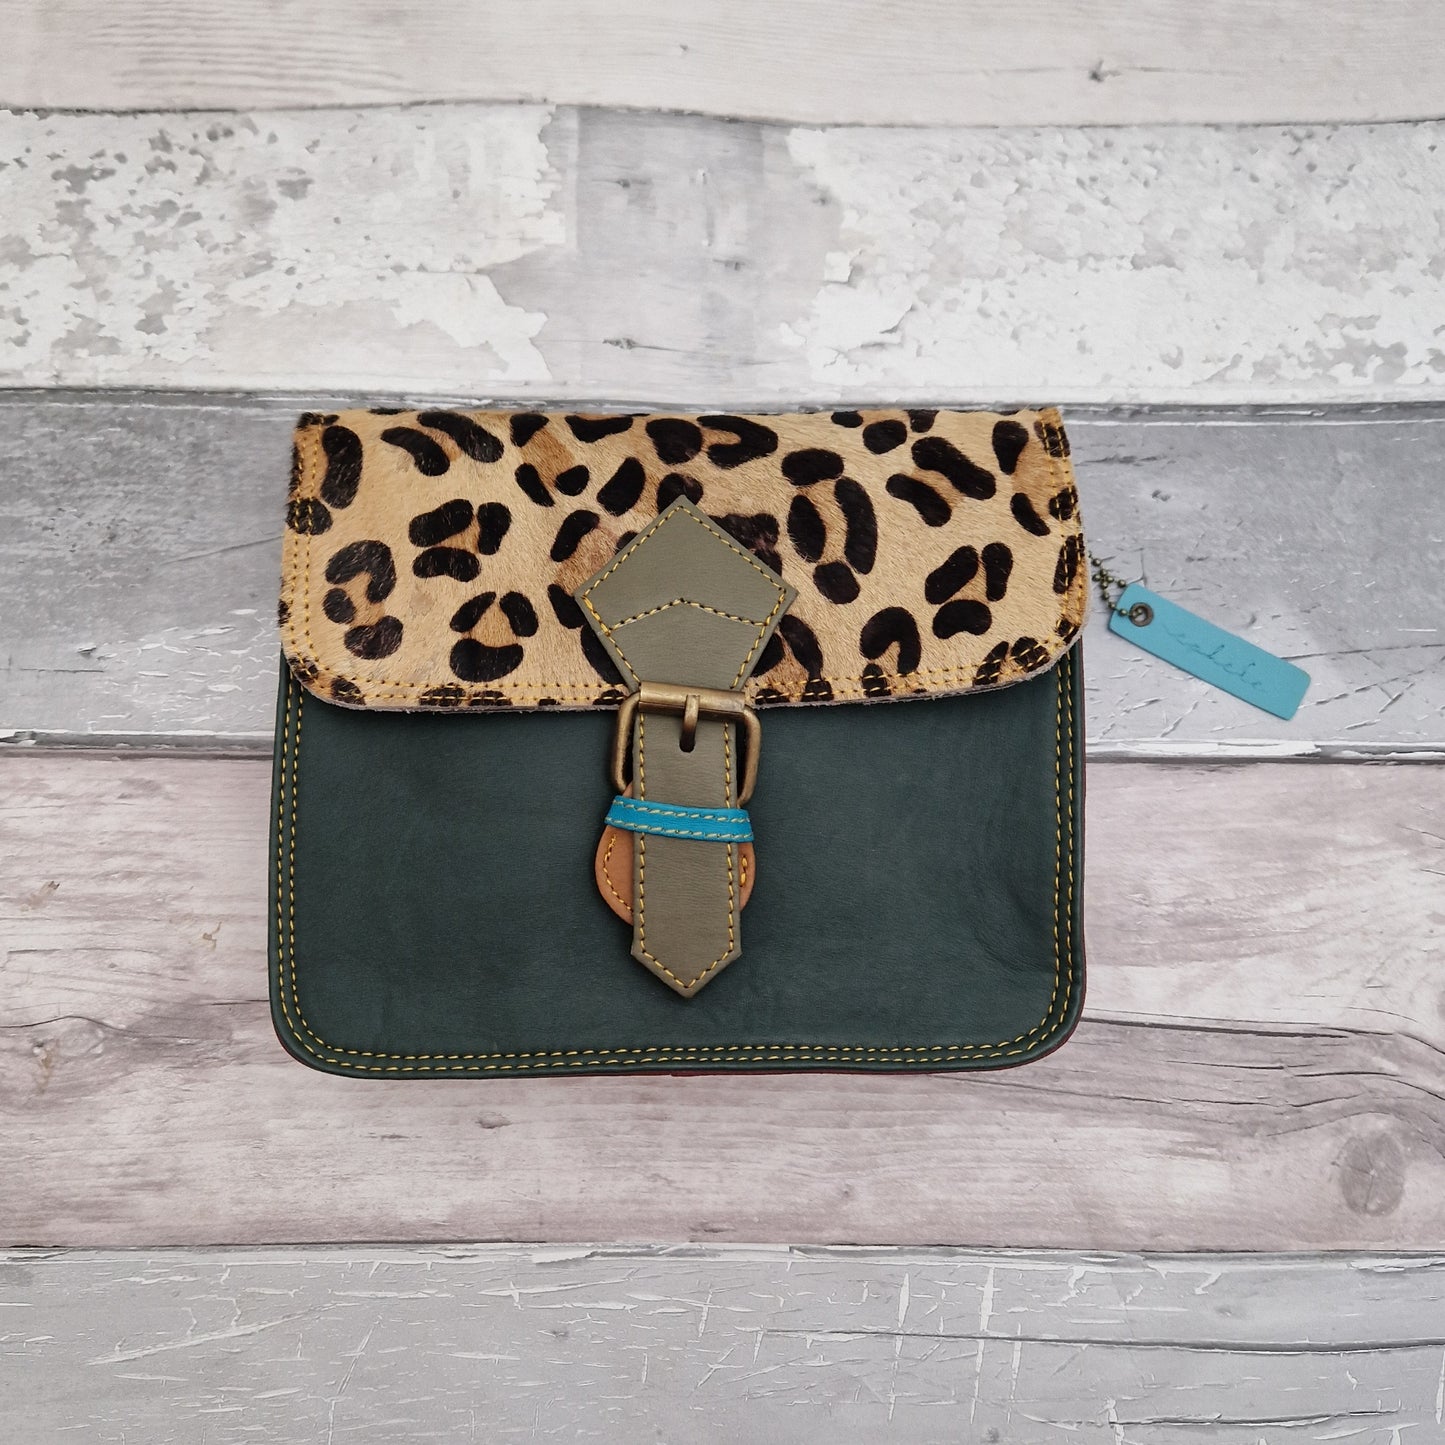 Green leather cross body bag with textured panel of leopard print.